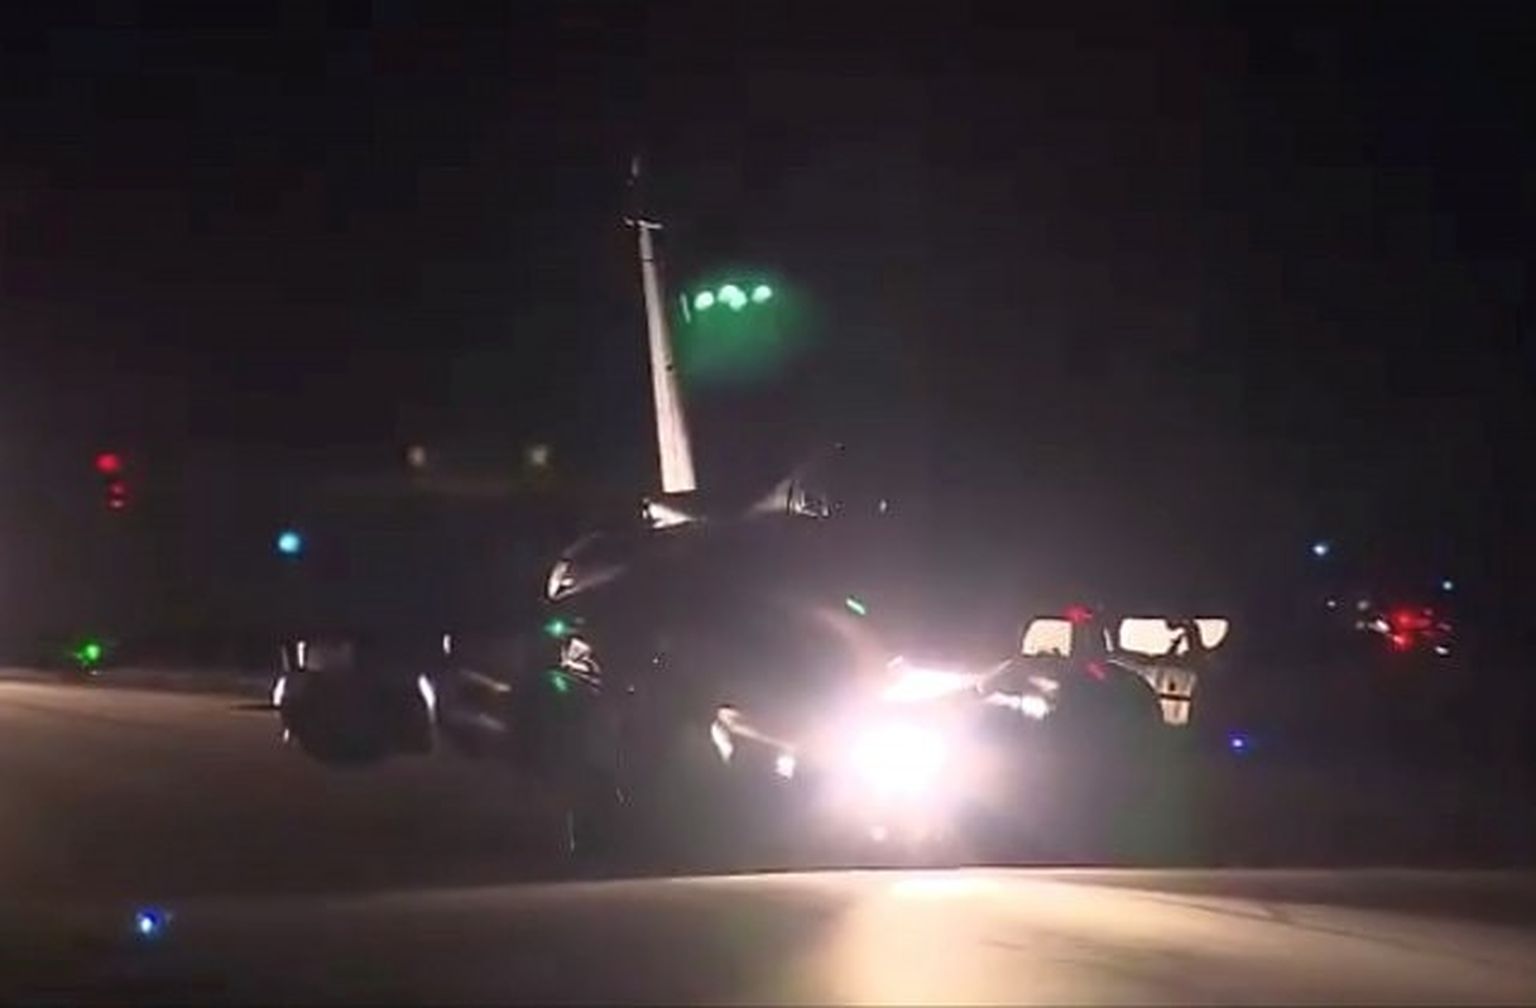 A plane prepares to take off as part of the joint airstrike operation by the British, French and U.S. militaries in Syria, in this still image from video footage obtained on April 14, 2018 from social media. courtesy Elysee/Twitter/via REUTERS